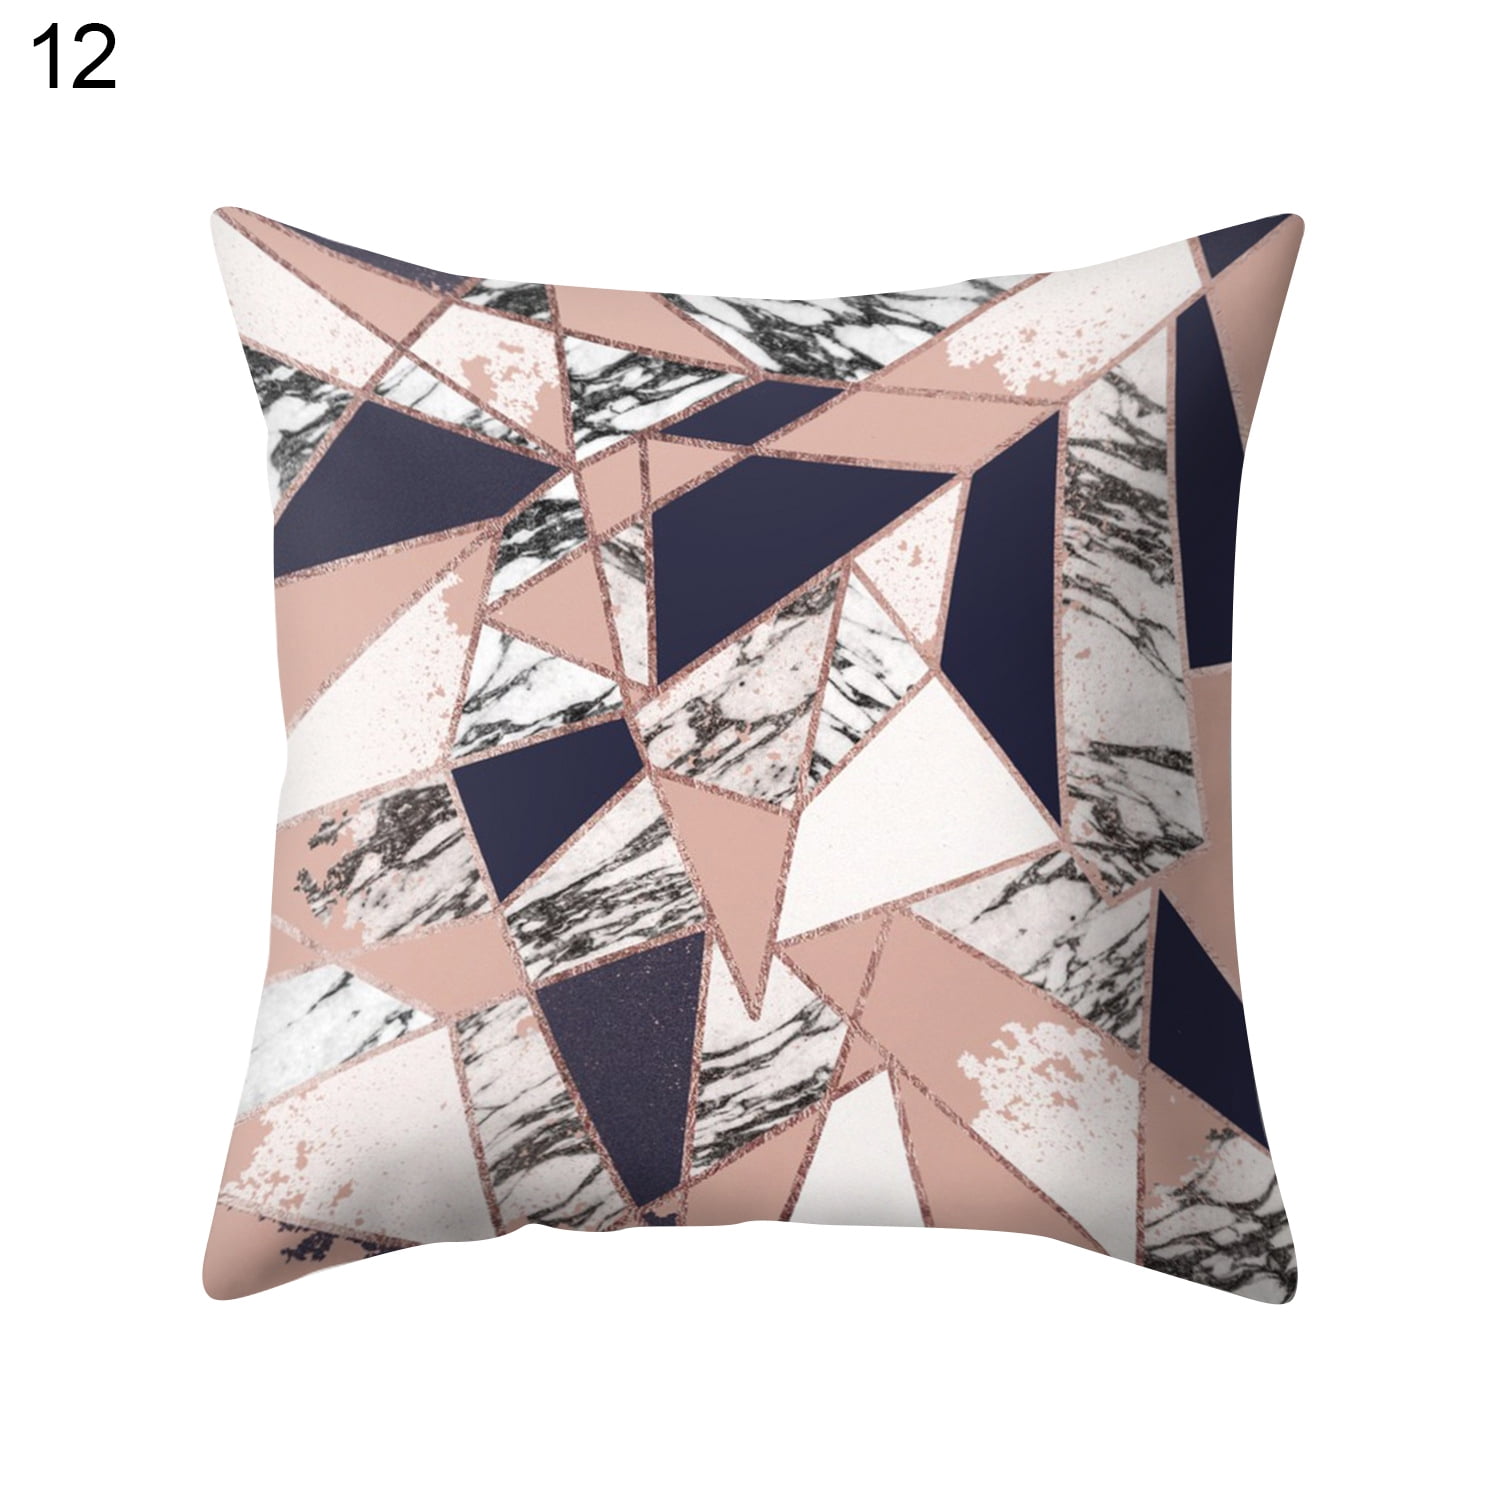 Details about   Geometric Pattern Pillow Cases Square Cushion Cover Sofa Bedroom Throw Homedecor 